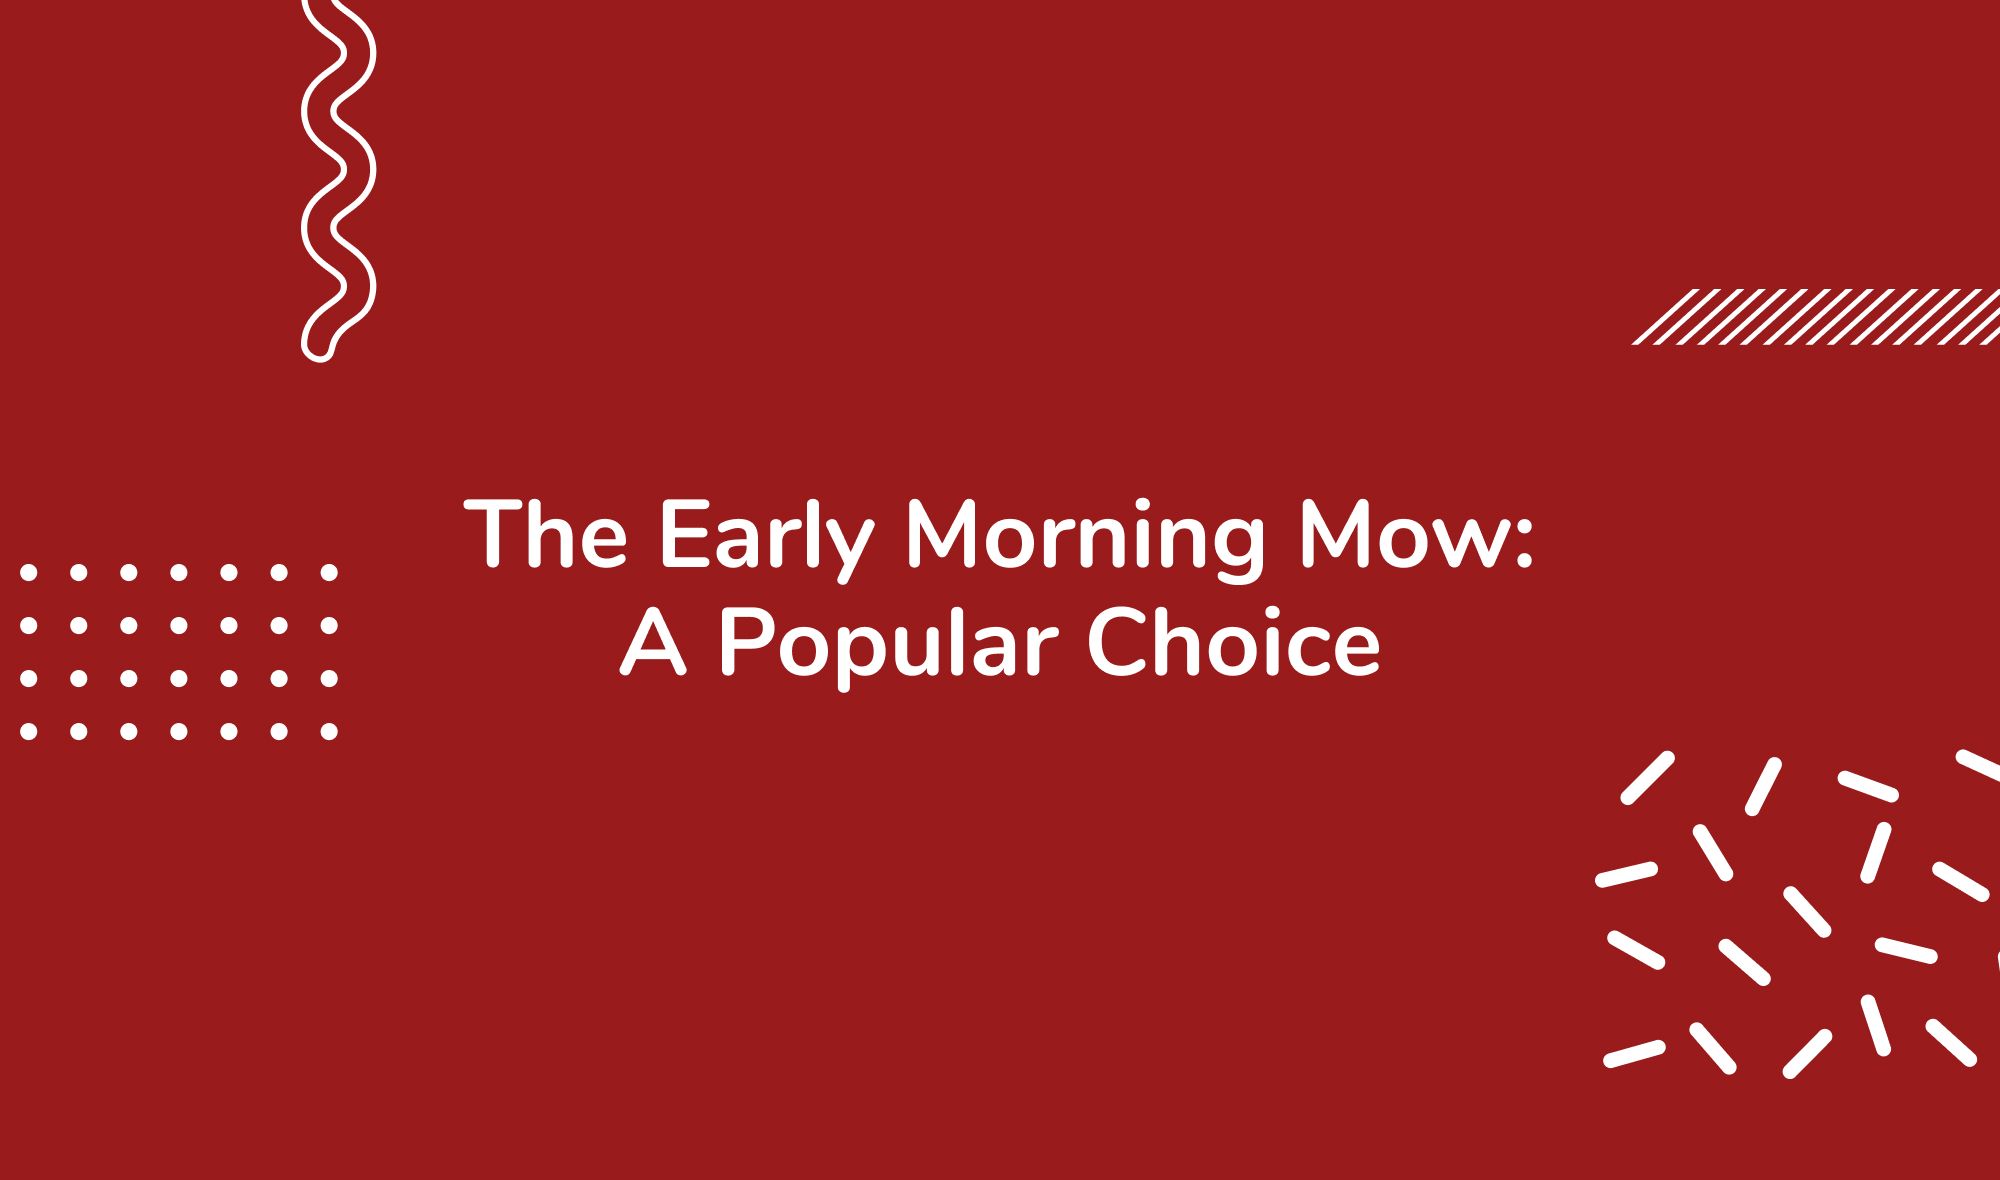 The Early Morning Mow: A Popular Choice